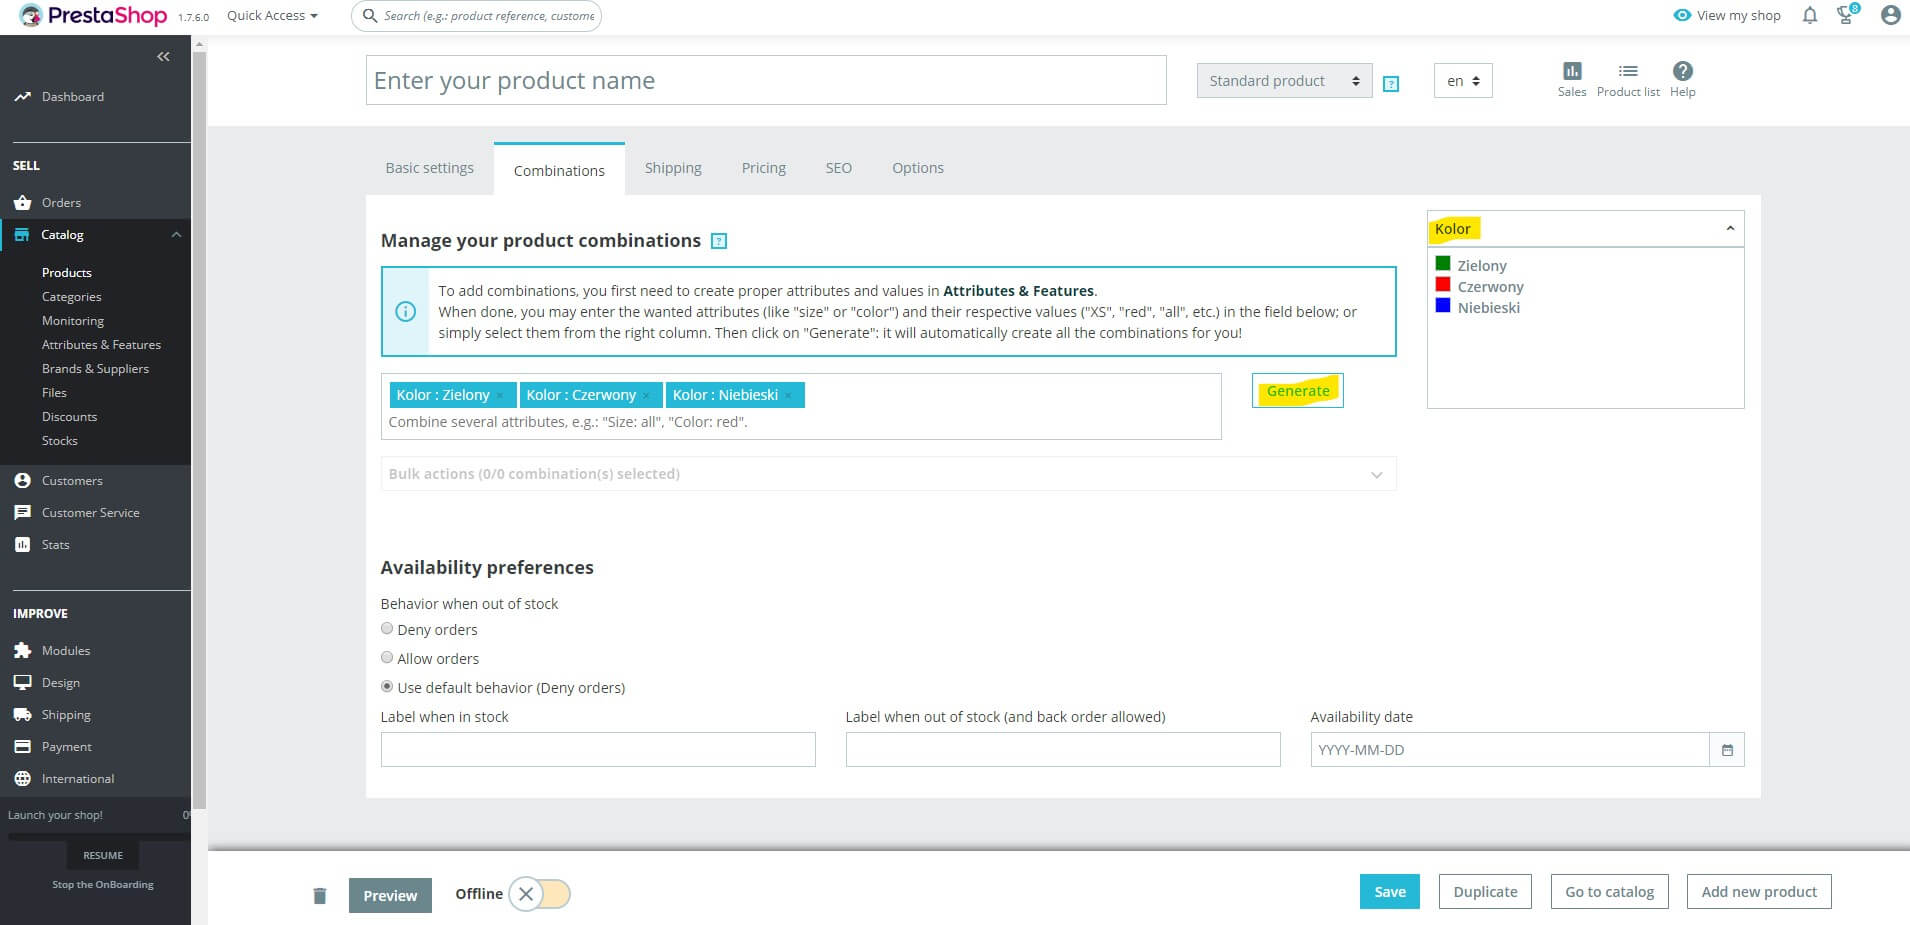 Generating combinations for the product PrestaShop 1.7